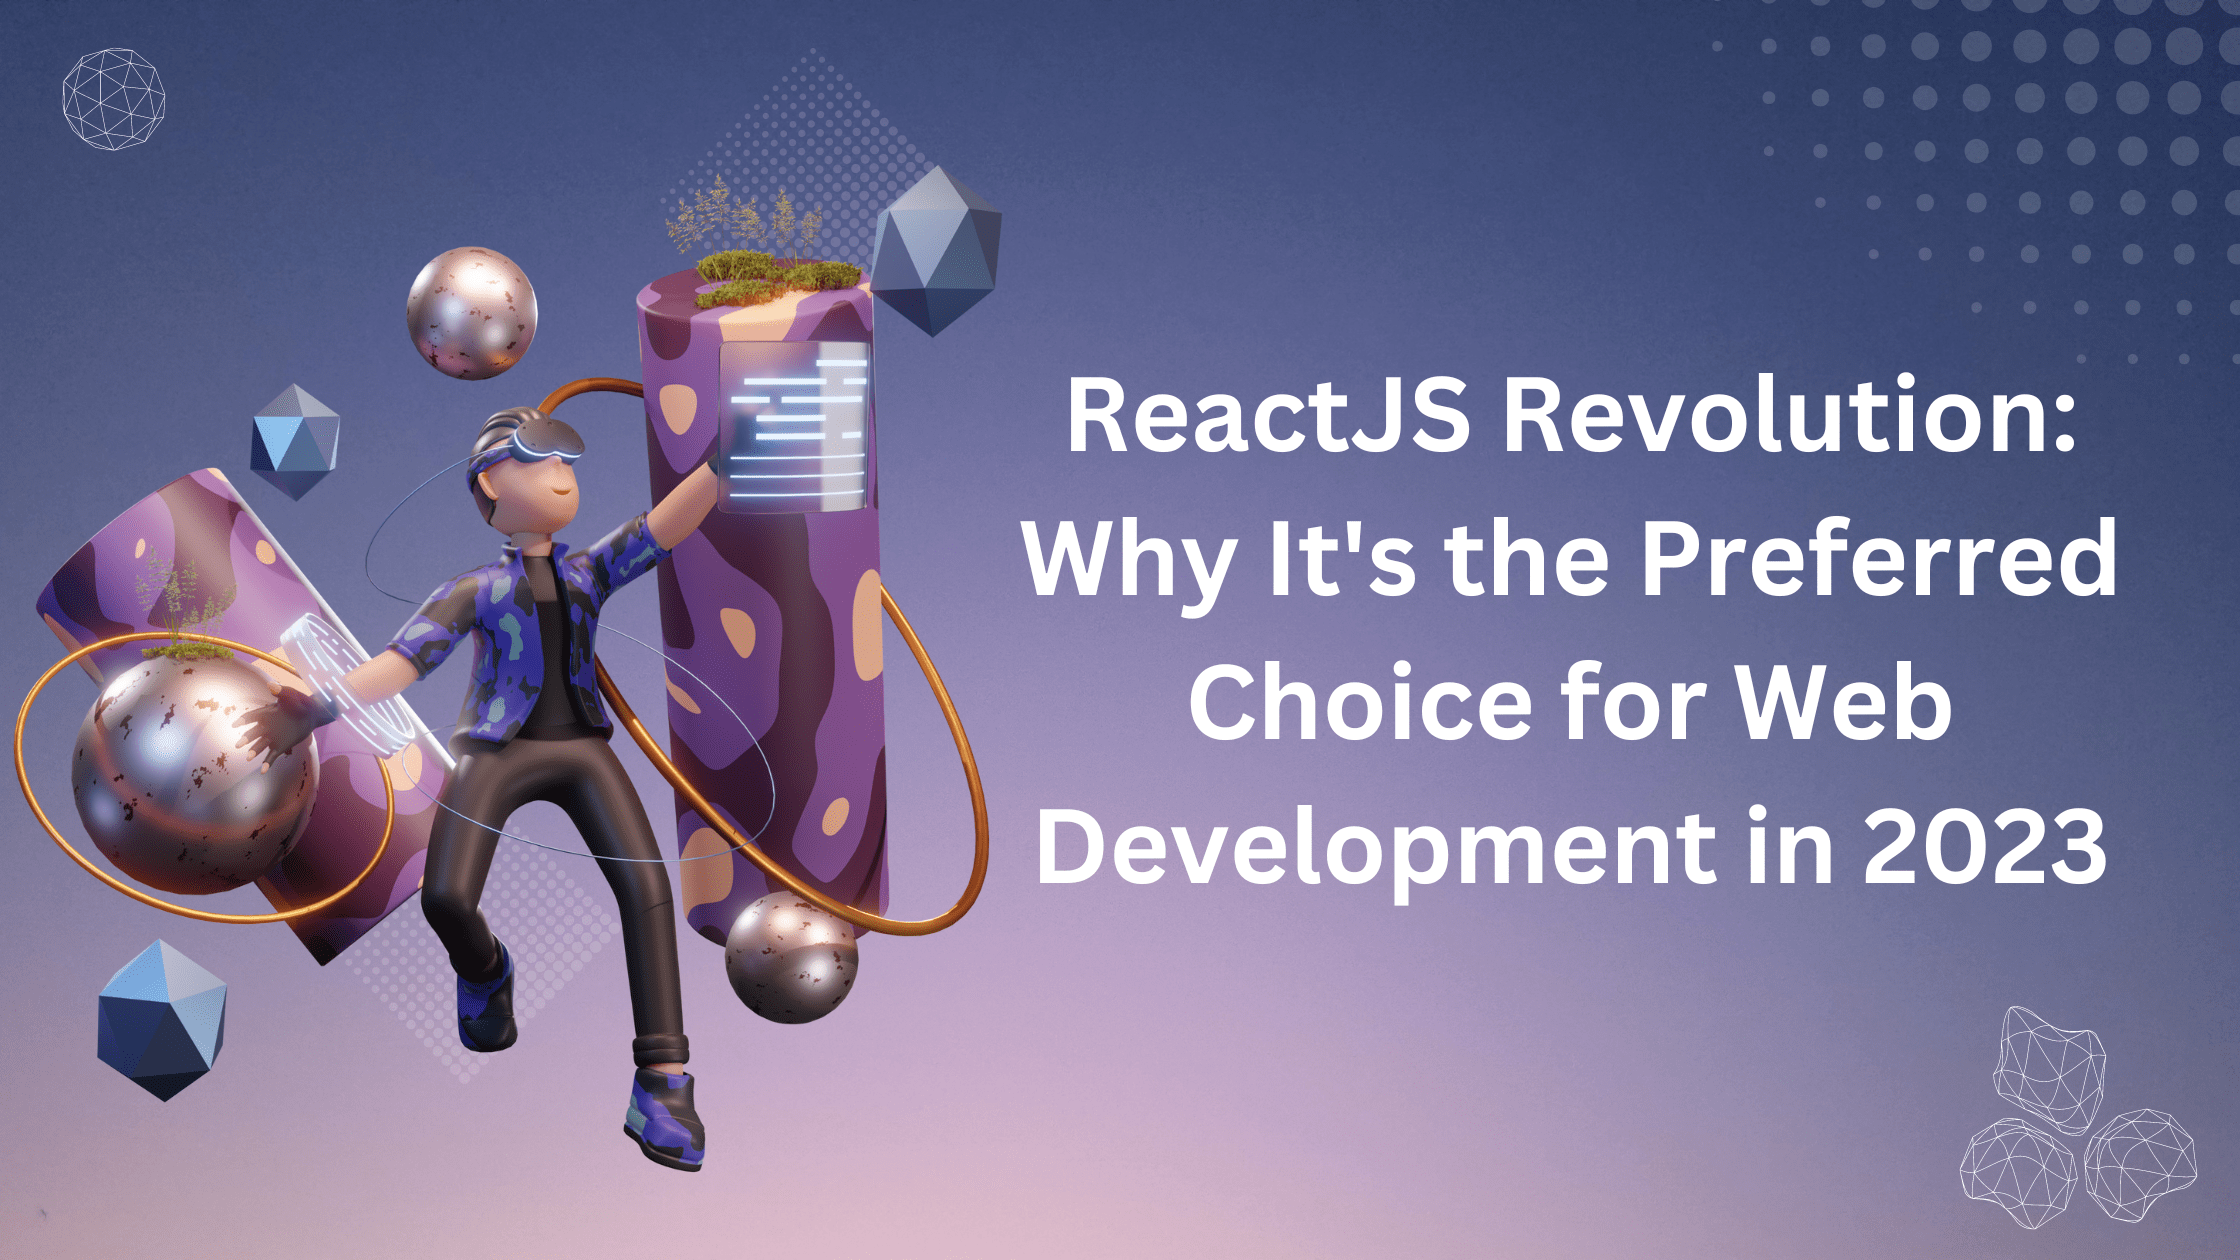 ReactJS Revolution: Why It’s the Preferred Choice for Web Development in 2023